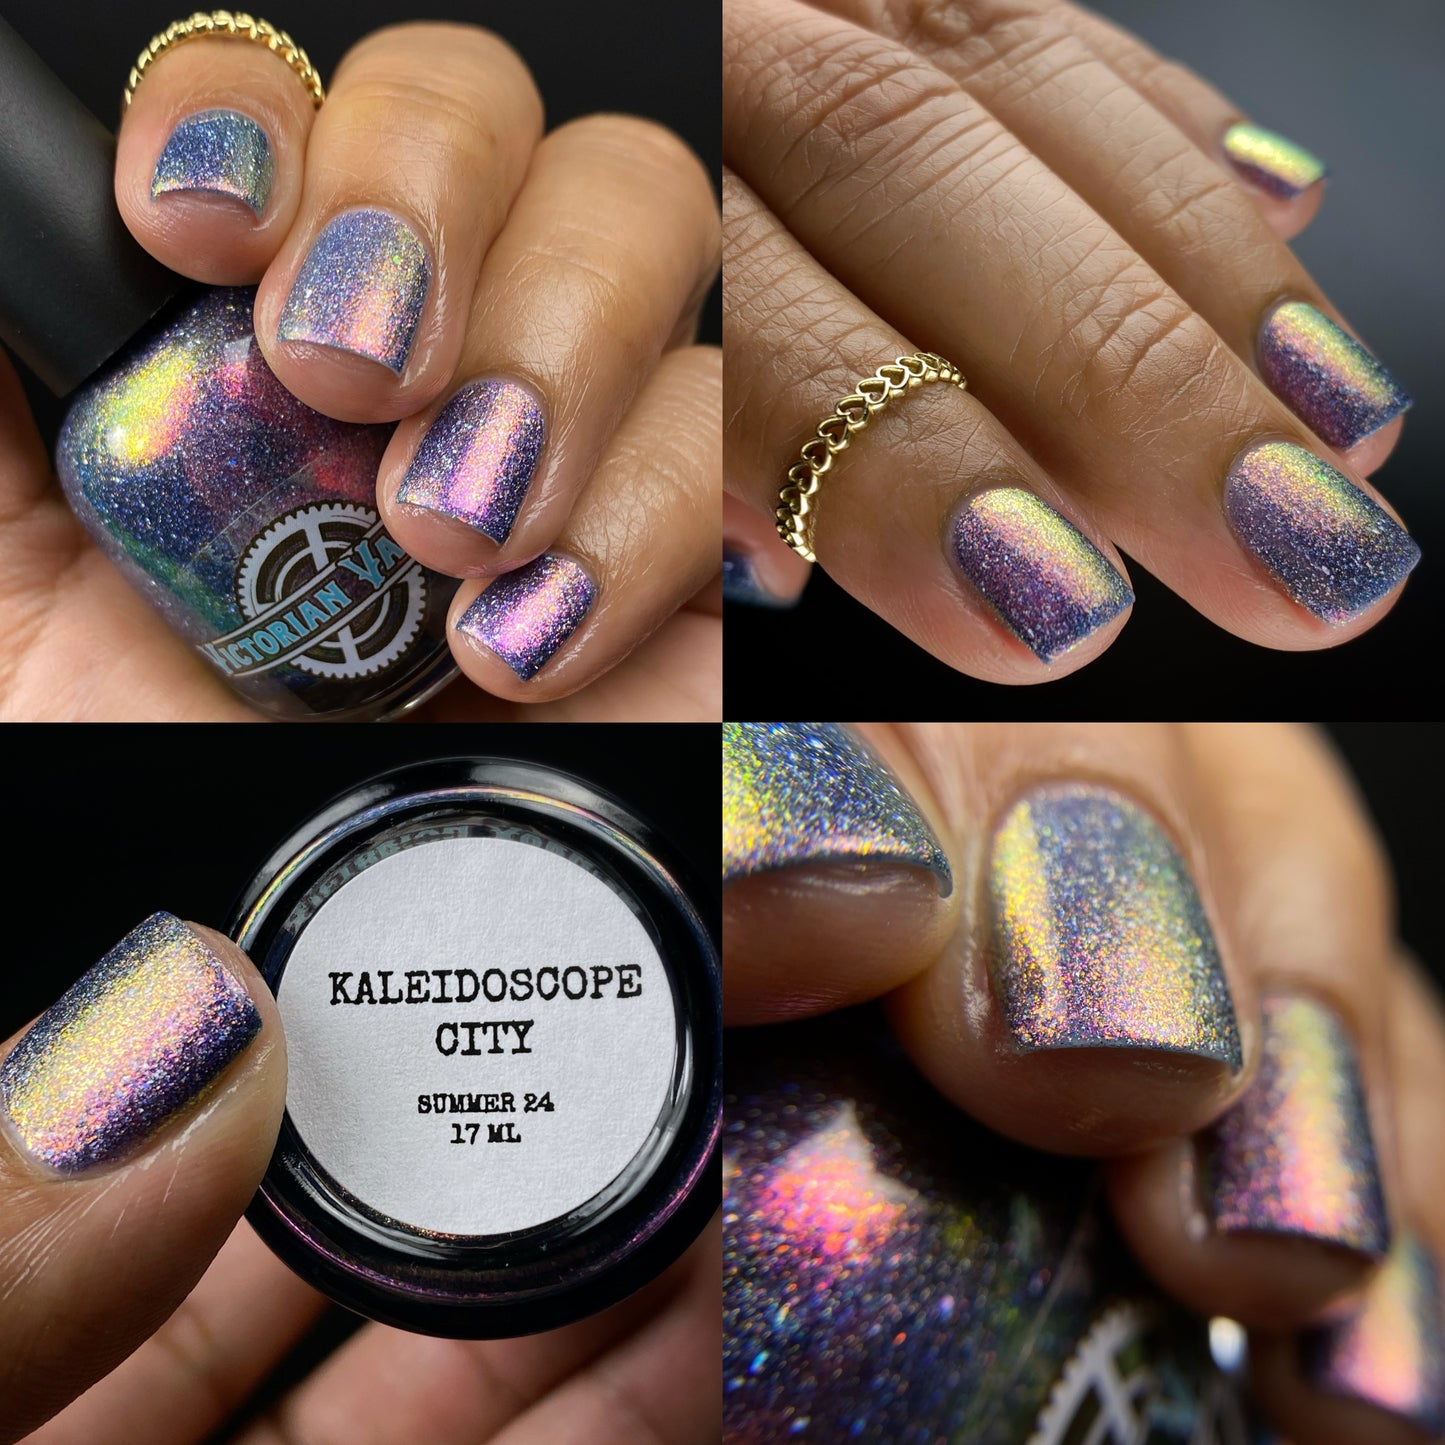 A blurple base with a scattered holo and holo flakies and shimmers ranging all through the prismatic spectrum- this is a holo Kaleidoscopic sibling.